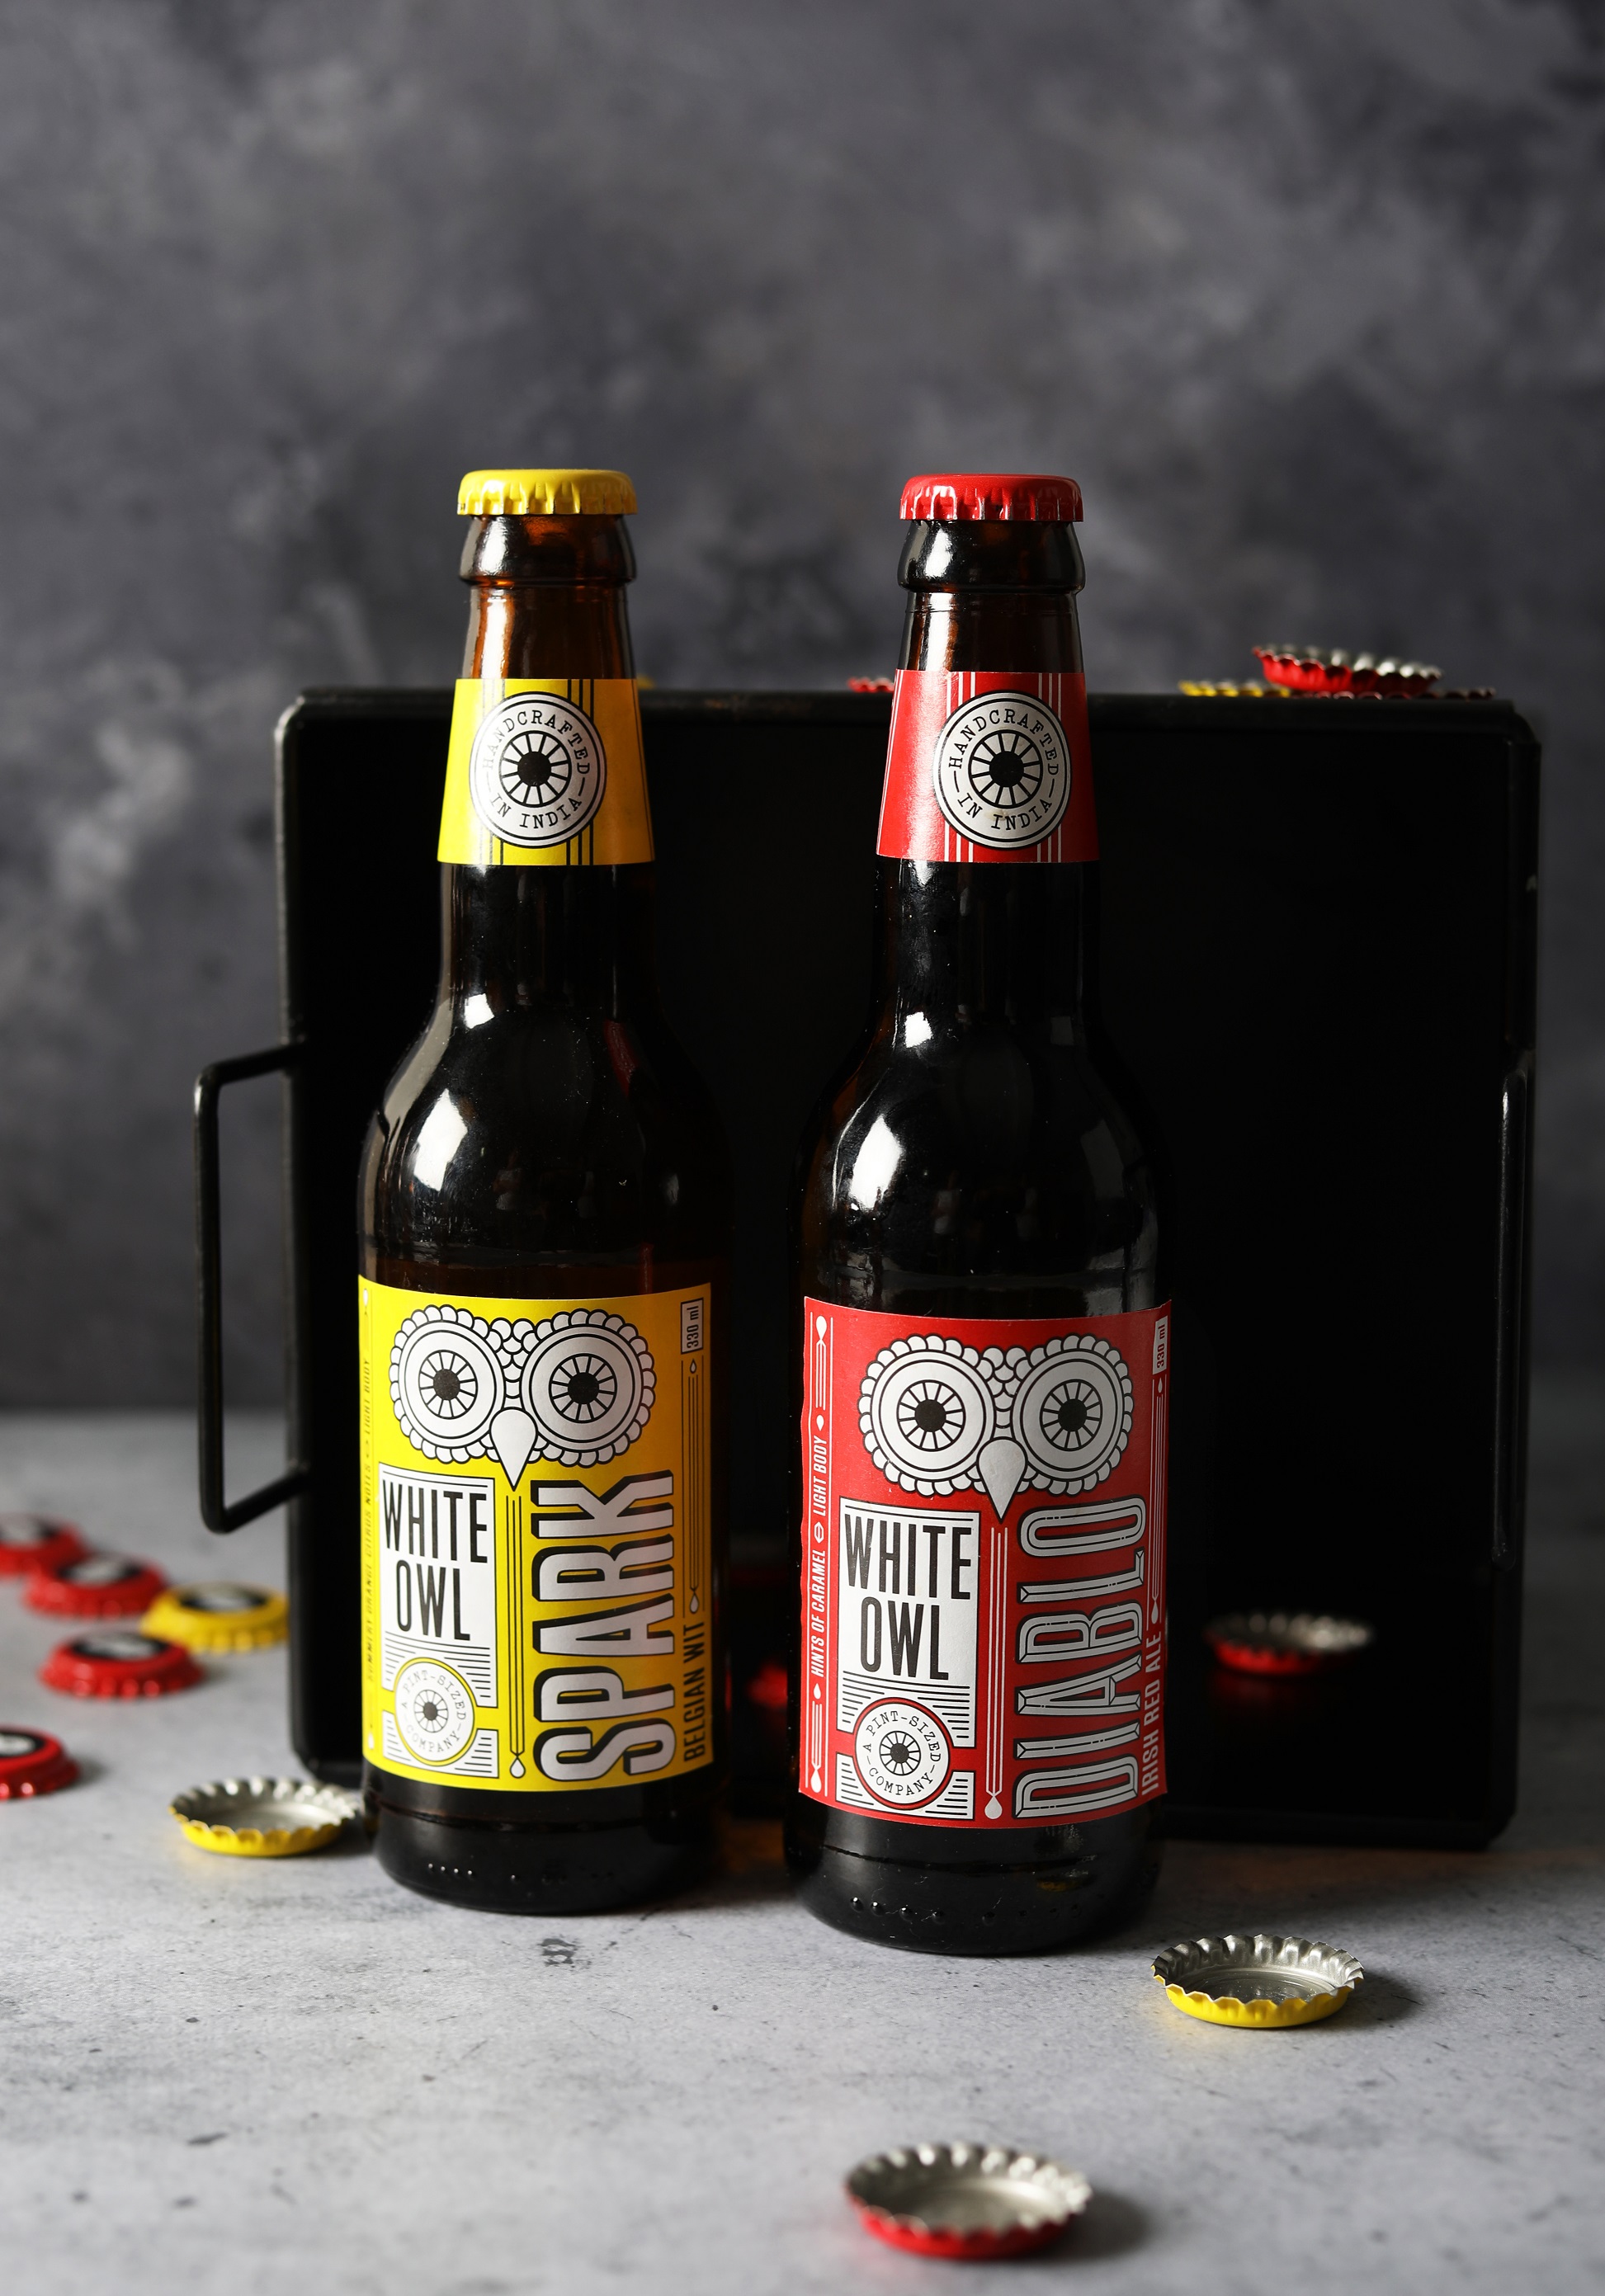 White Owl Brewery Expands Distribution To Delhi India The Beer